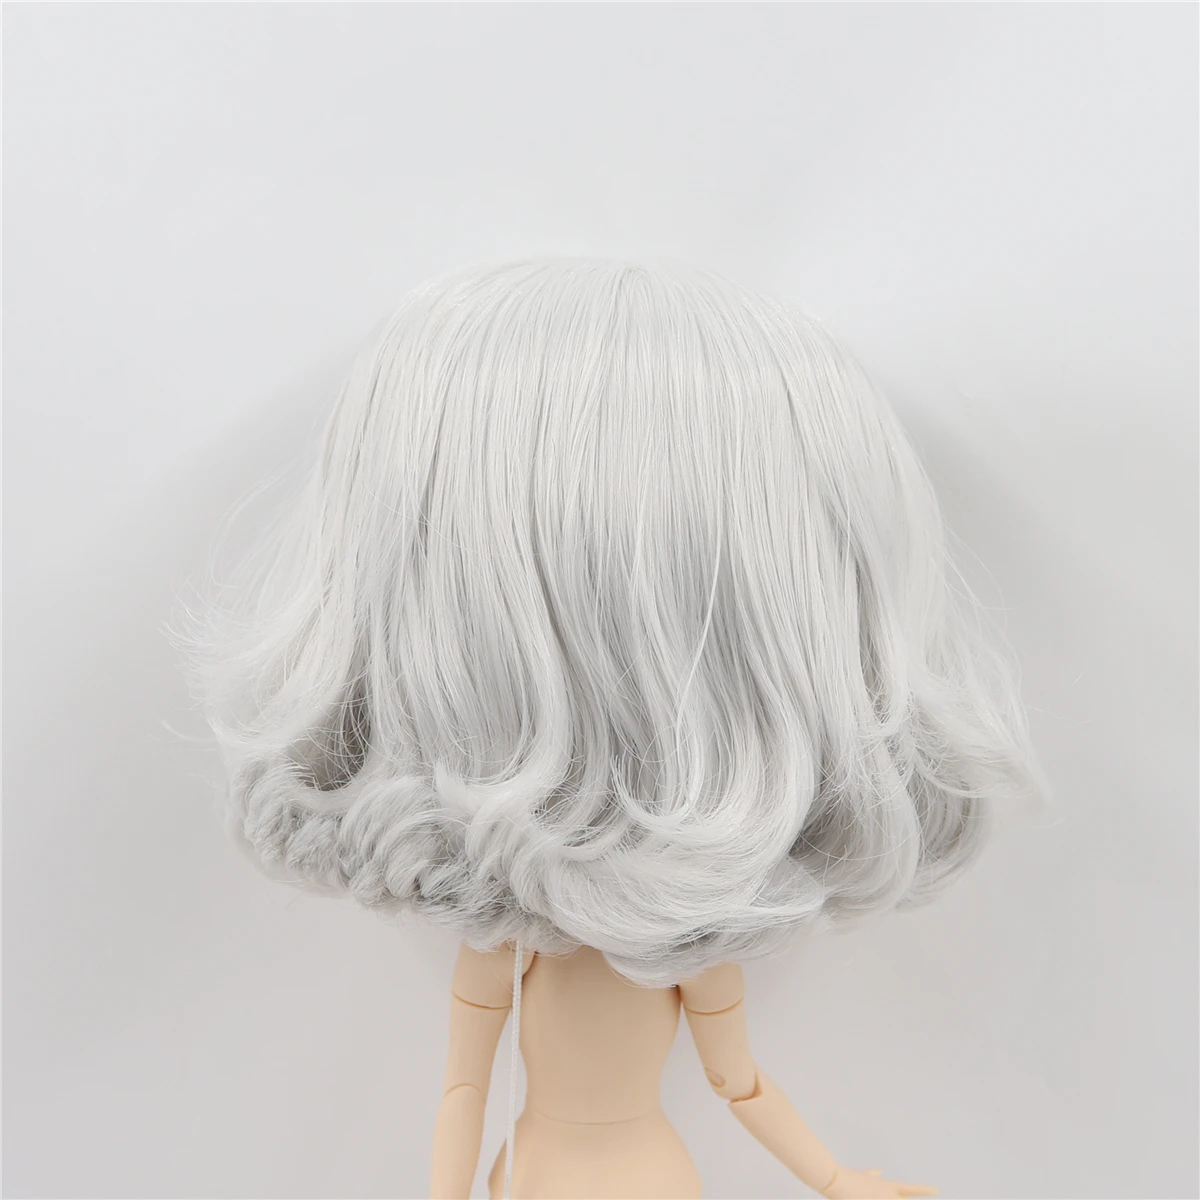 Middie Blythe Doll Hair Premium Grey Wig With Scalp Dome 1